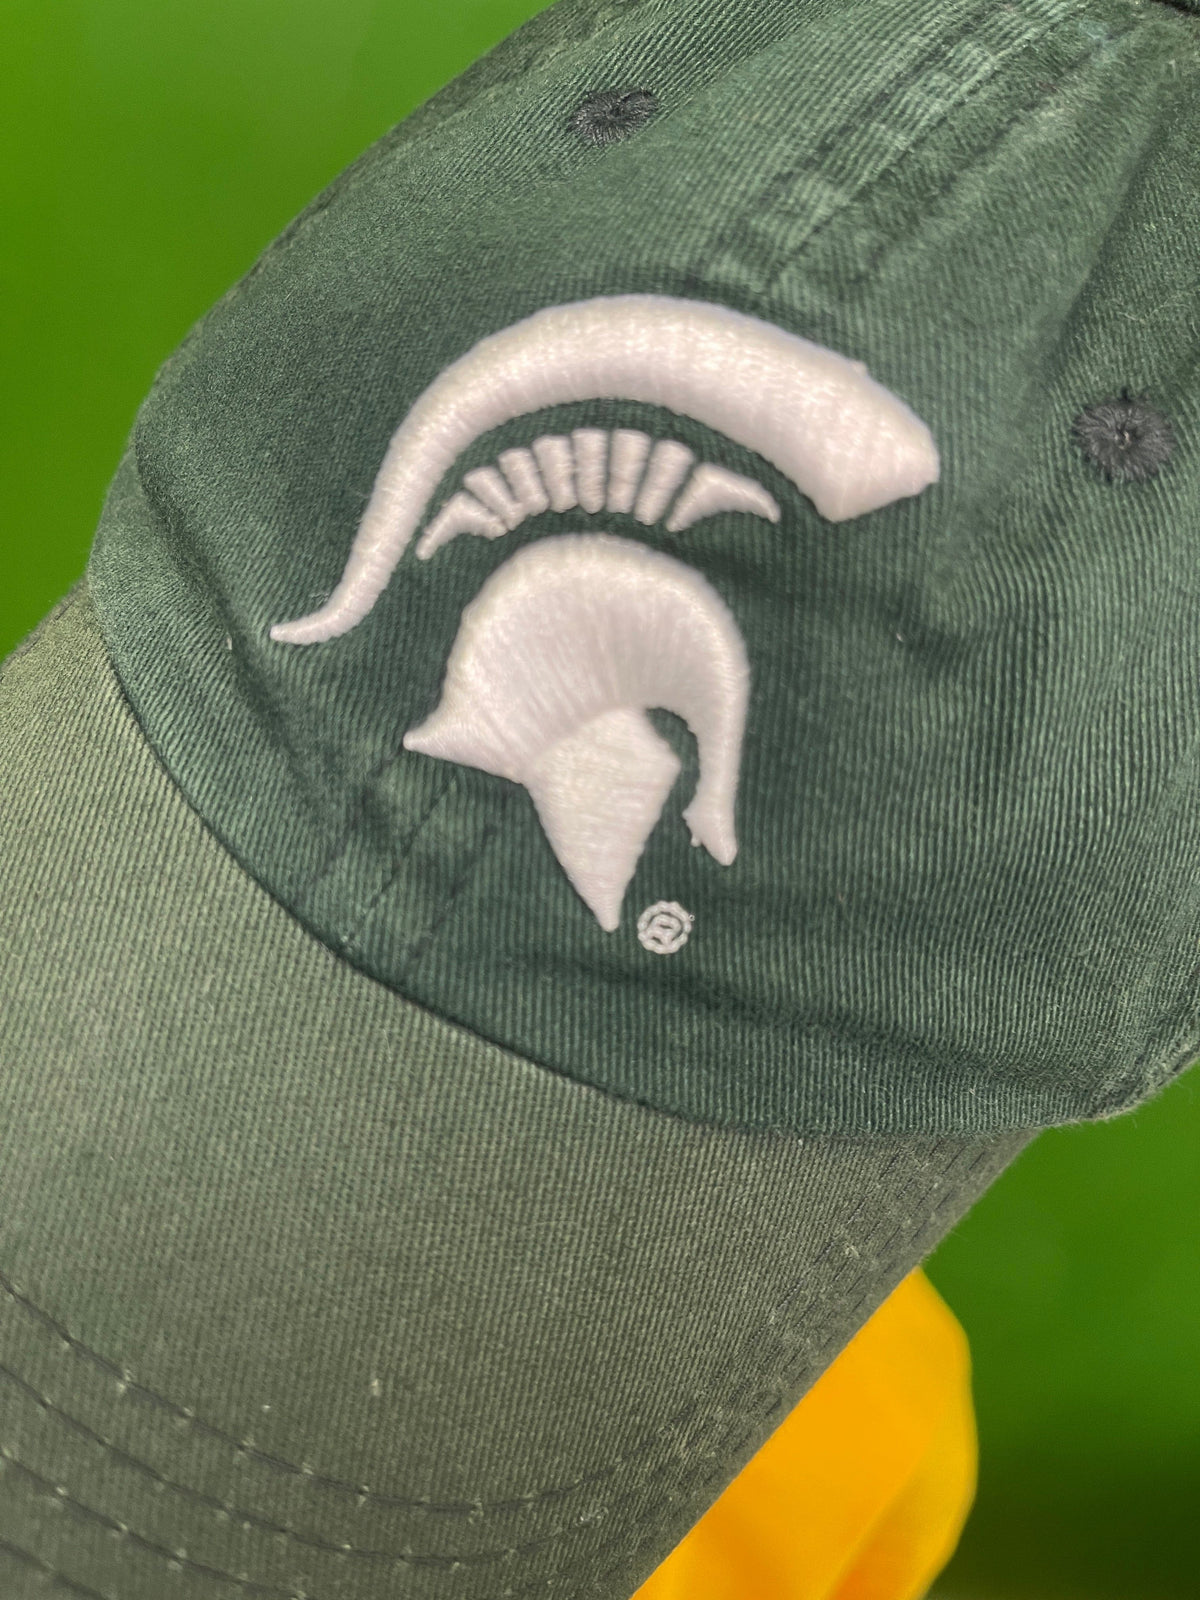 NCAA Michigan State Spartans Adjustable Strapback Hat/Cap Youth OSFM